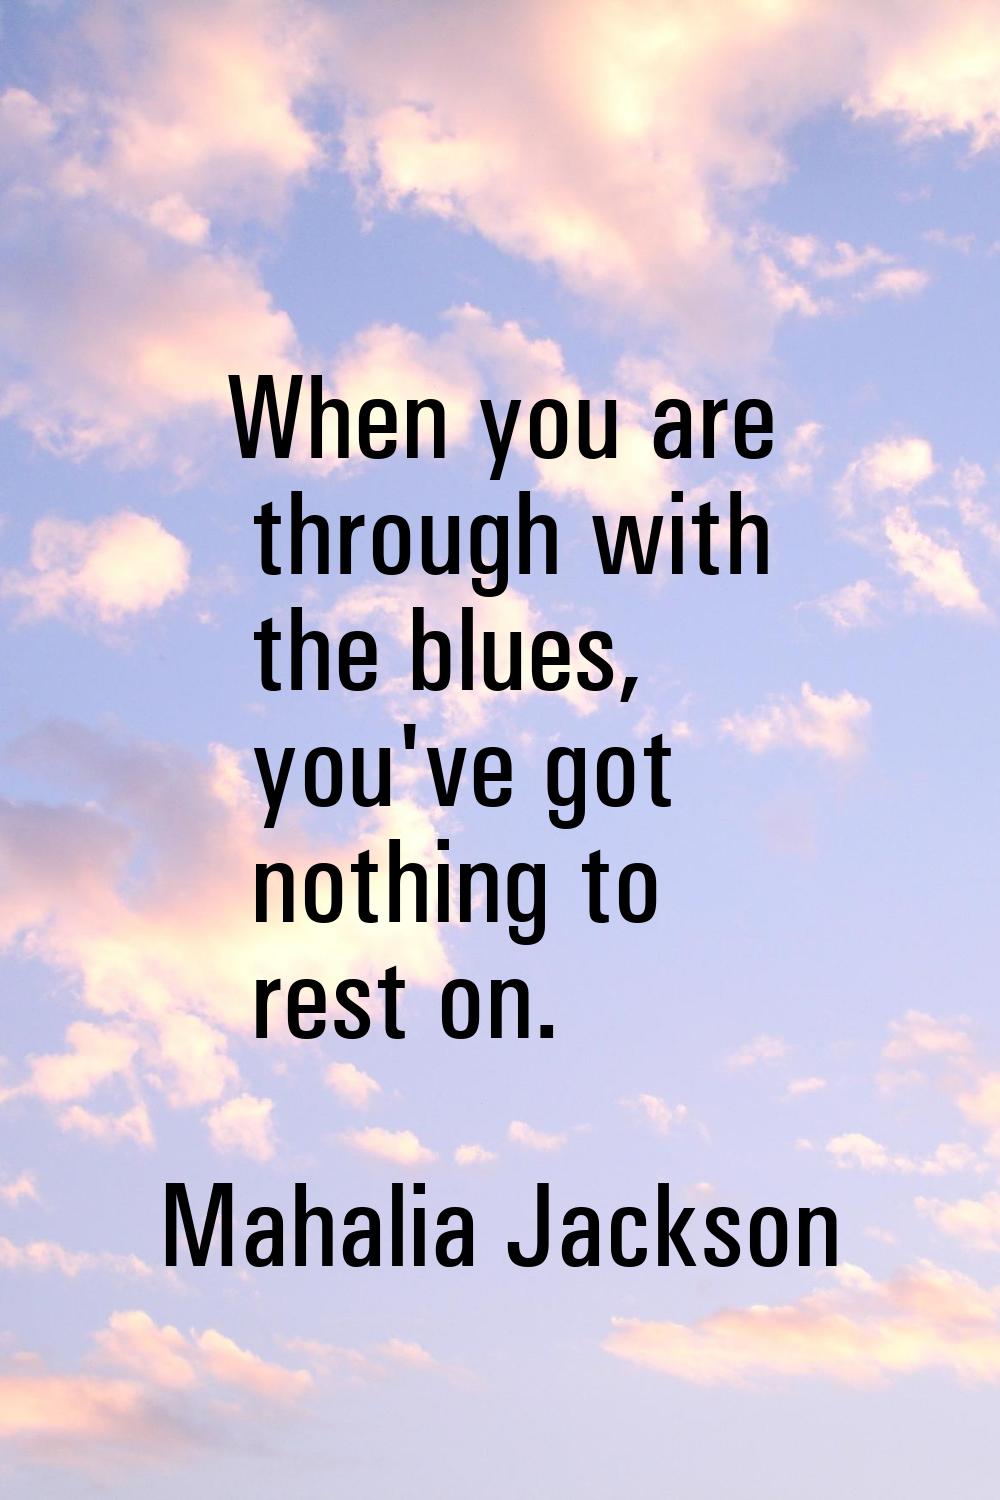 When you are through with the blues, you've got nothing to rest on.